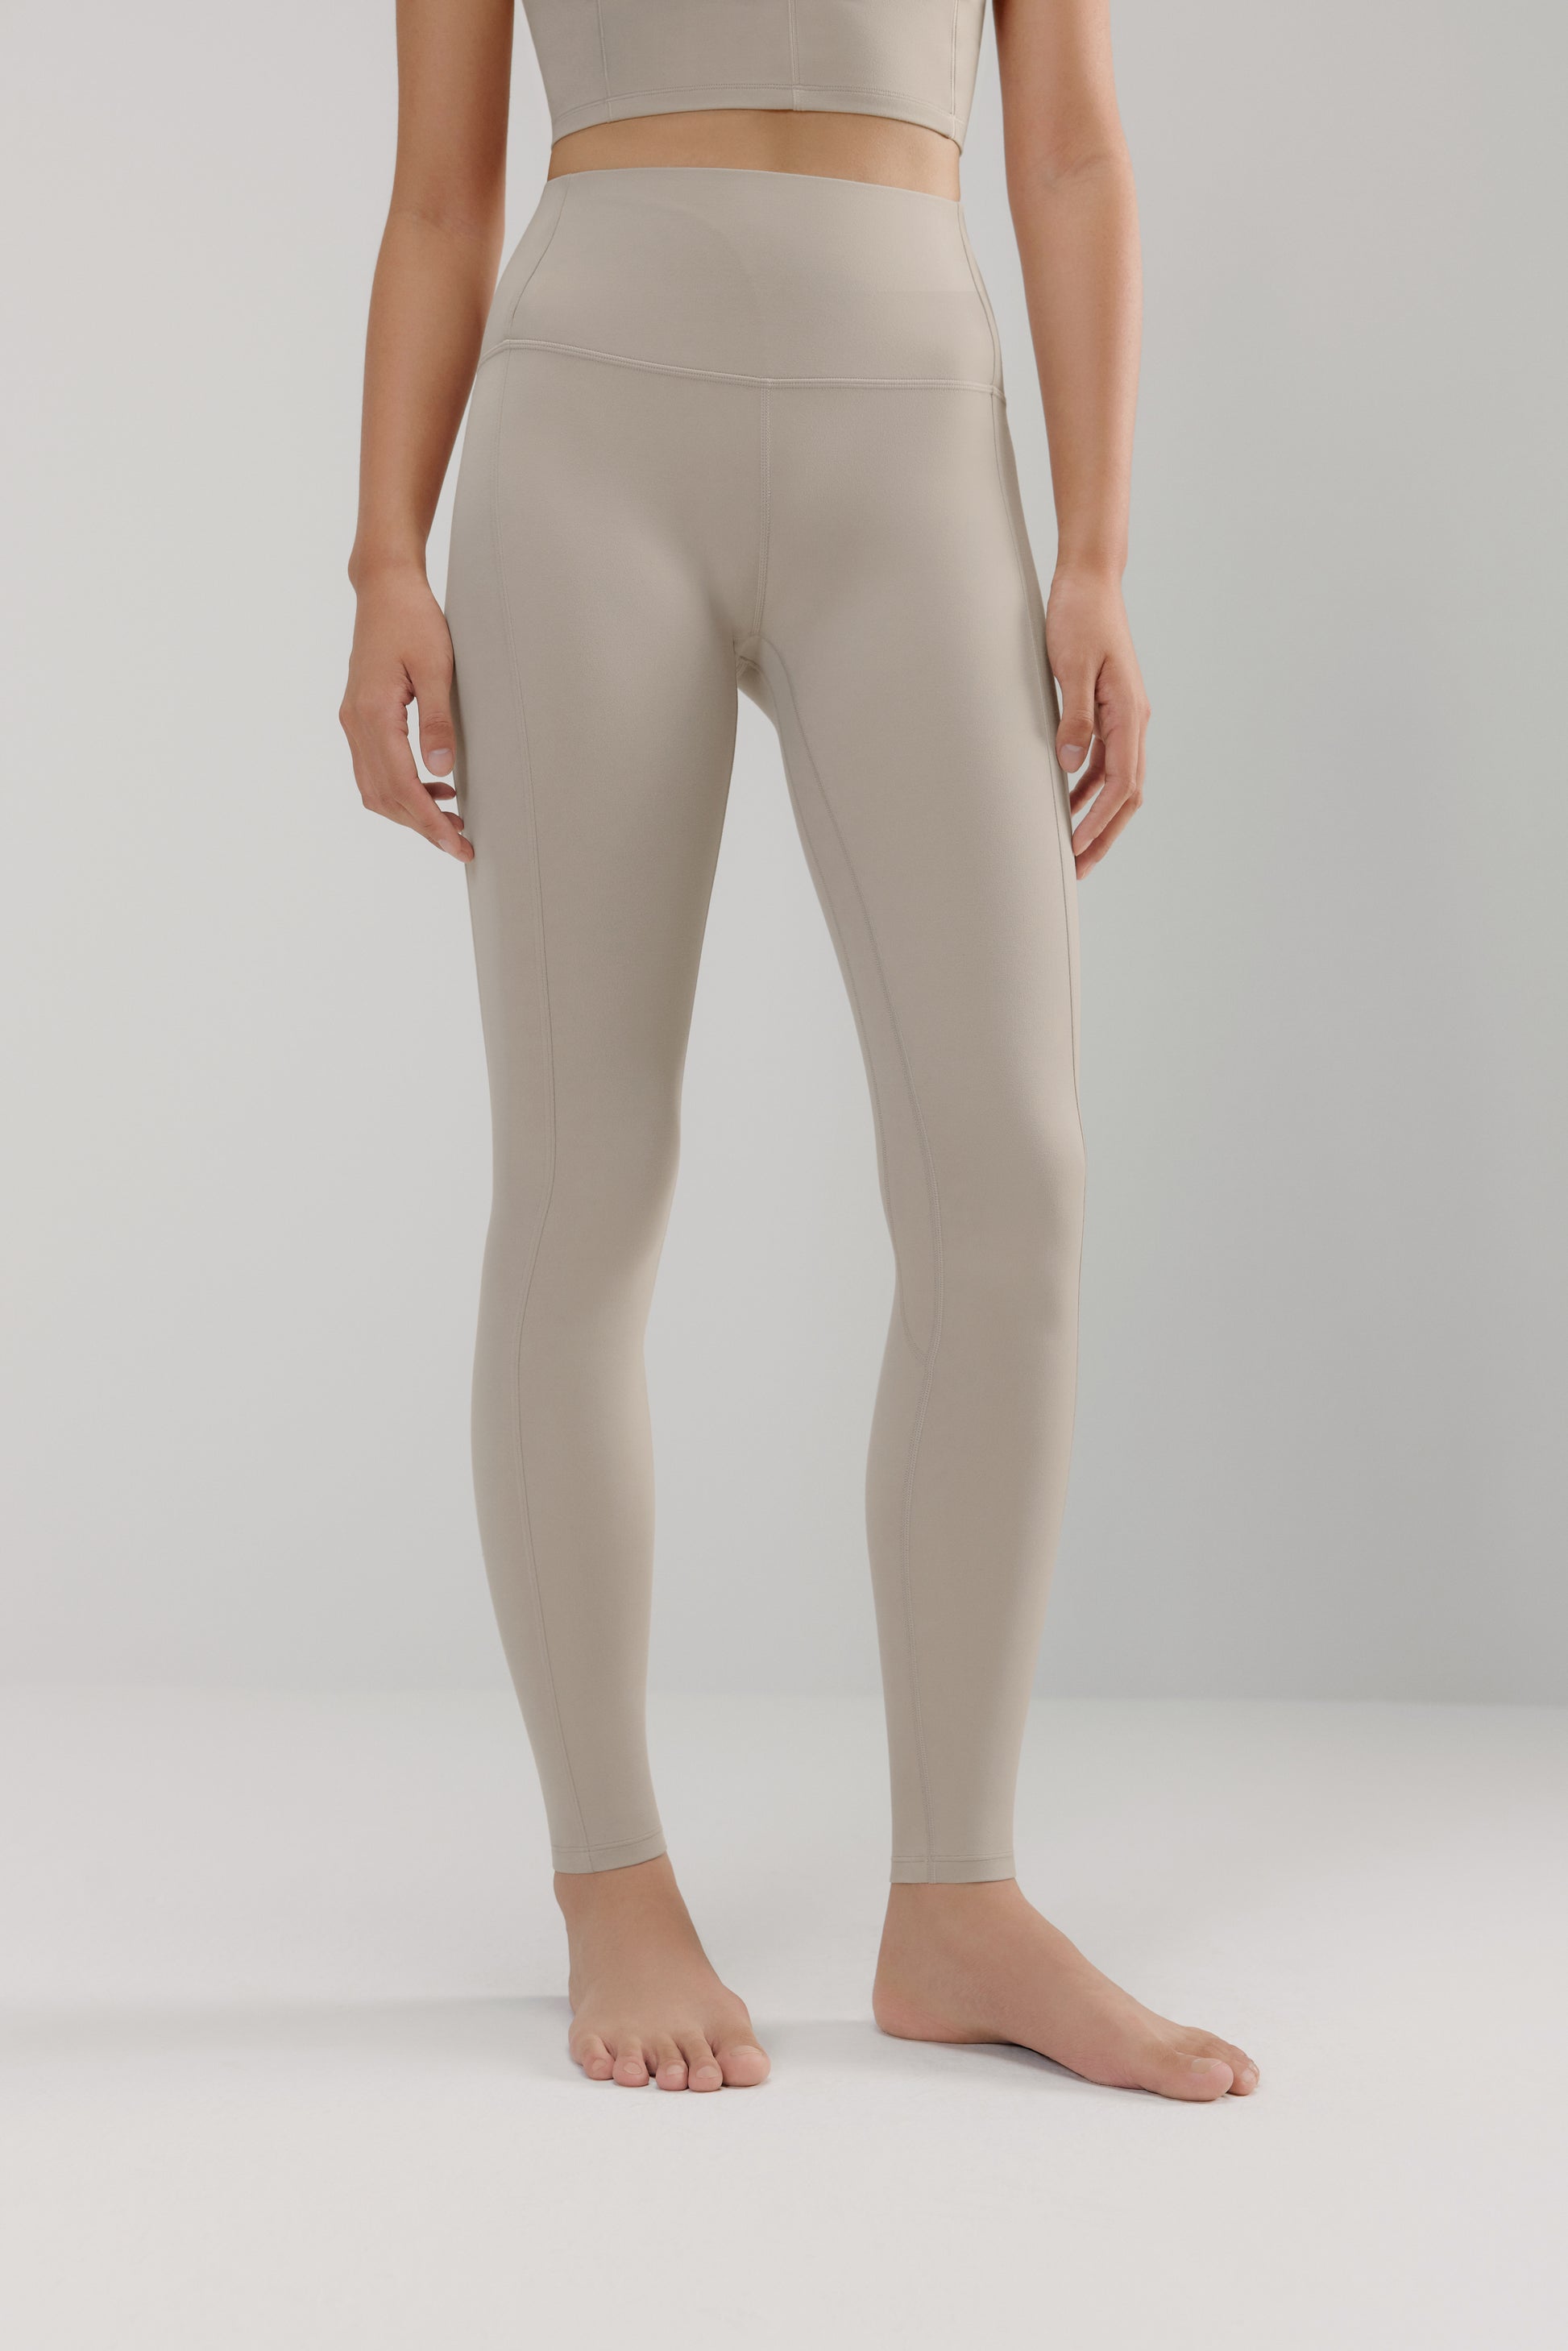 obsession shapewear, Pants & Jumpsuits, Obssesion Shapewear Brand New  High Wasted V Shape Leggings Size M